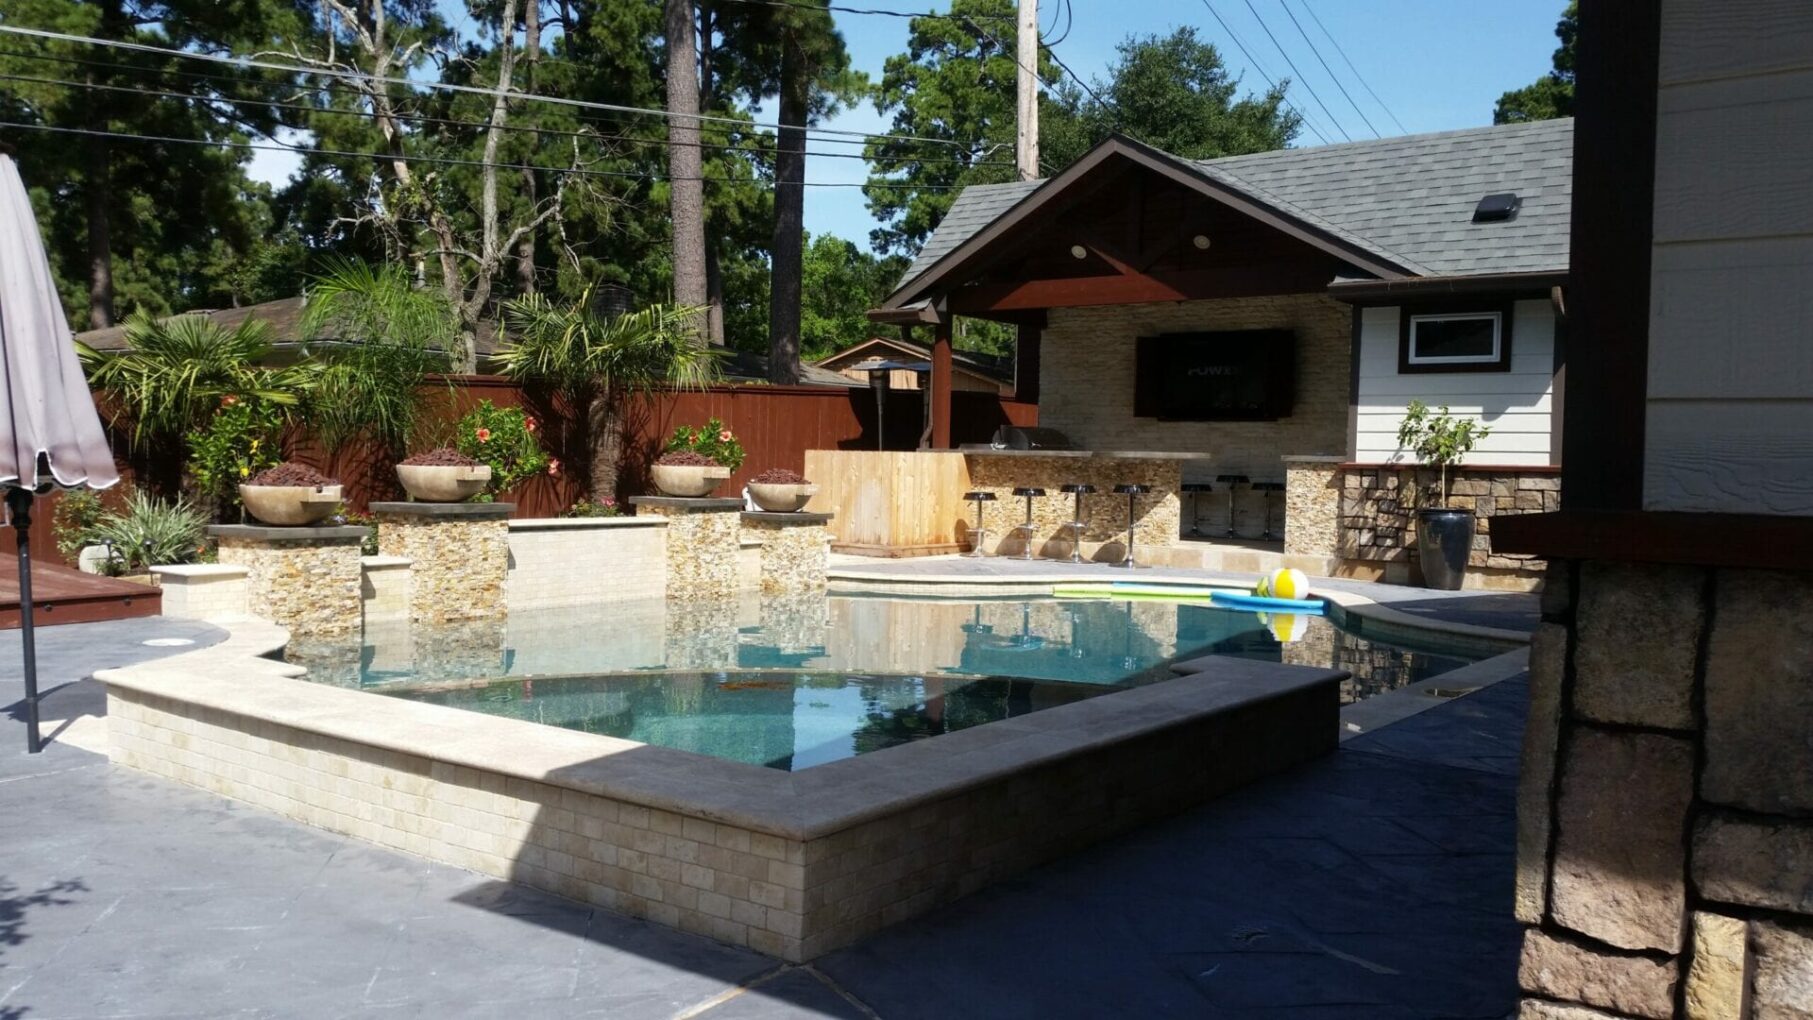 A pool with a stone wall and a large outdoor area.